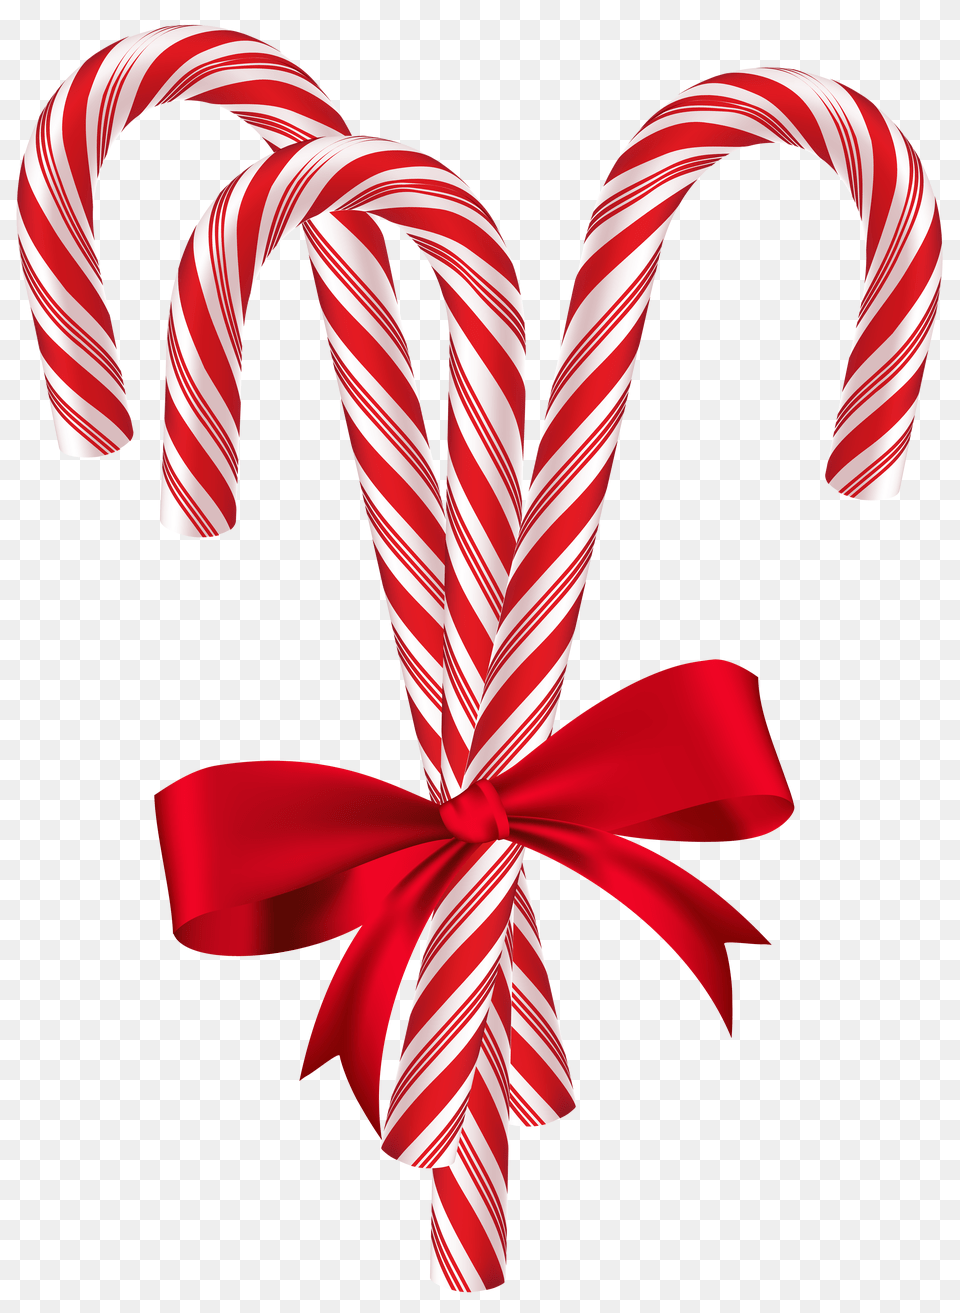 Candy Cane Image With Christmas Candy Cane Free Png Download